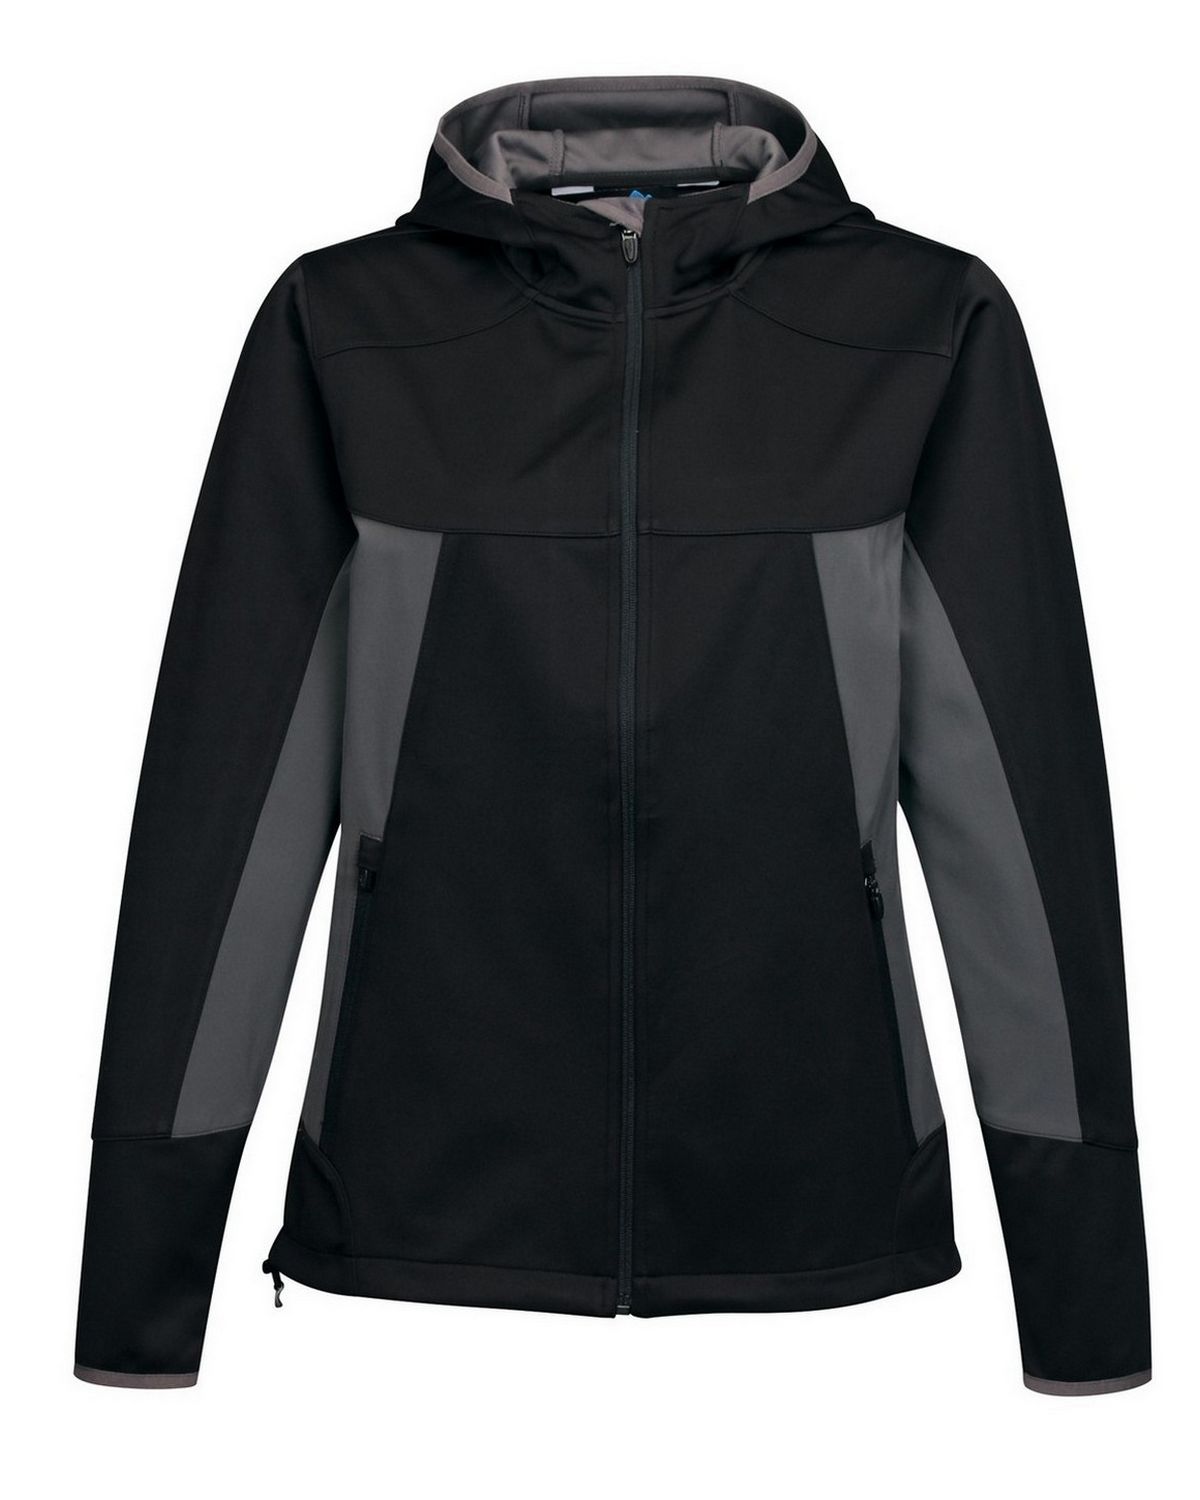 Reviews about Tri-Mountain Performance JL6158 Women’s Hooded Jacket ...